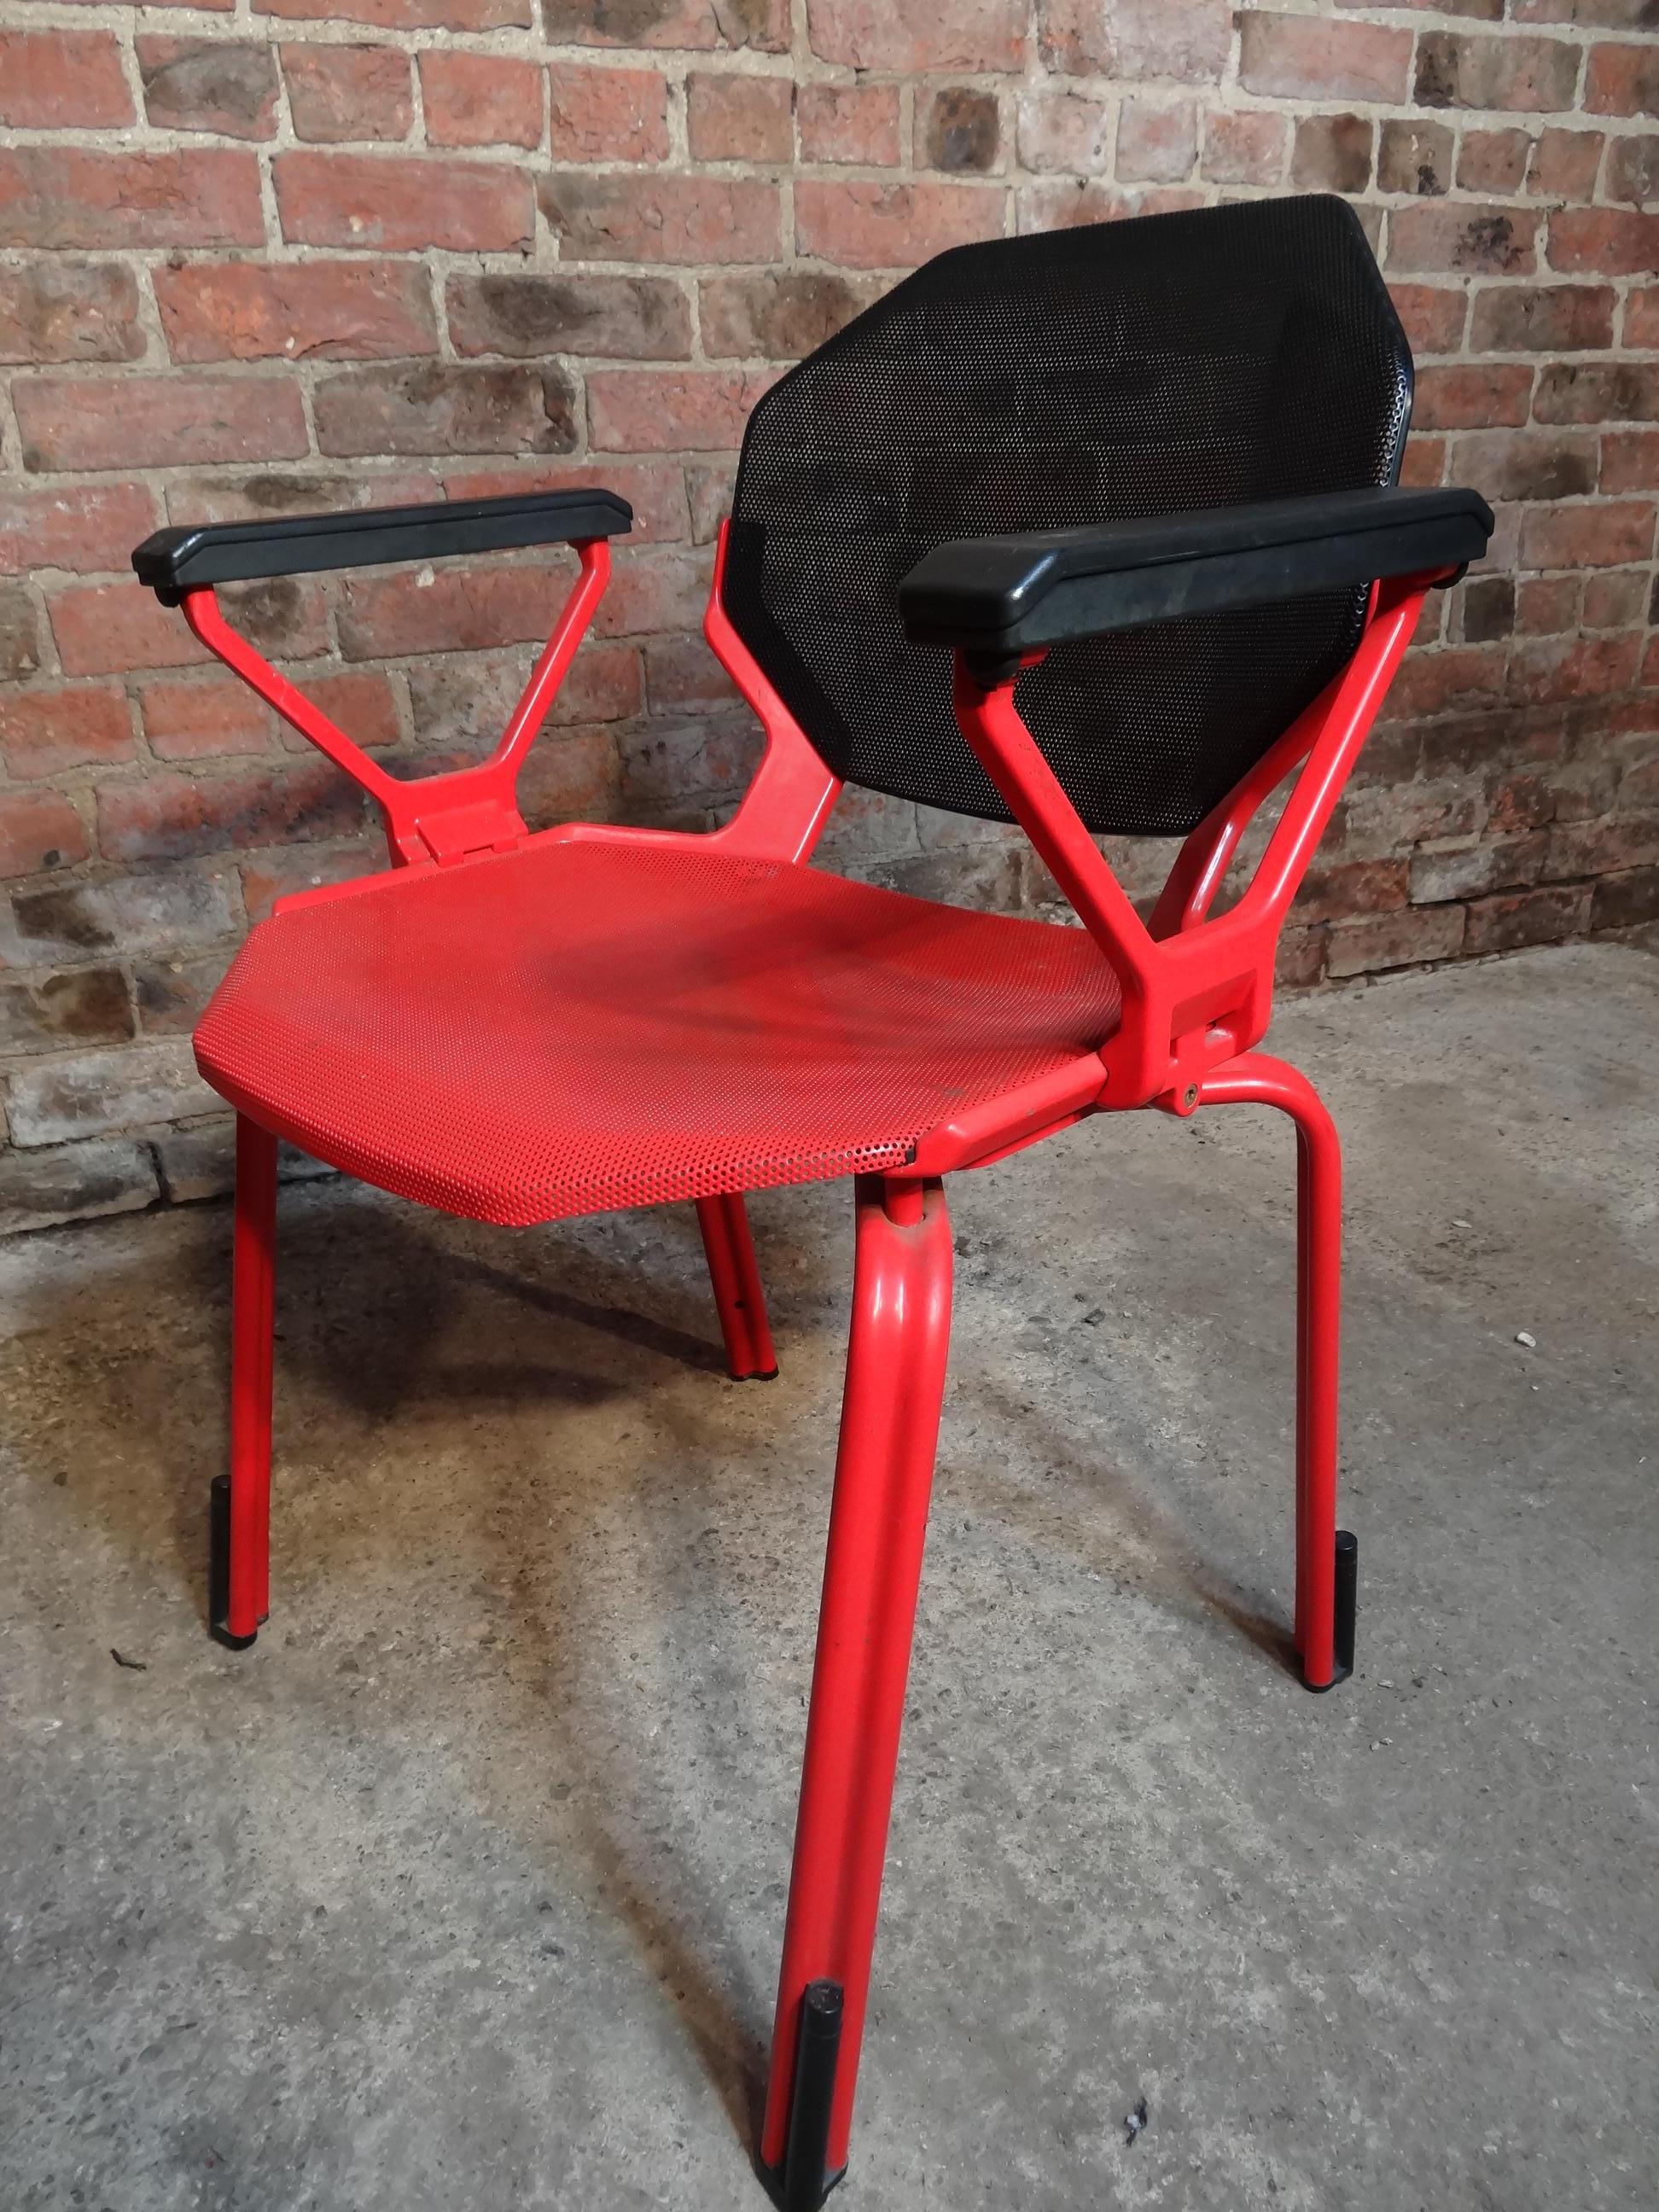 Froscher designed Retro 1970 red metal office / desk arm chair for Sitform, stunning designed by Froscher for Sitform, original designer metal chairs, the chairs are in very good vintage condition.

Delivery price is per chair. 

Measures: Seat